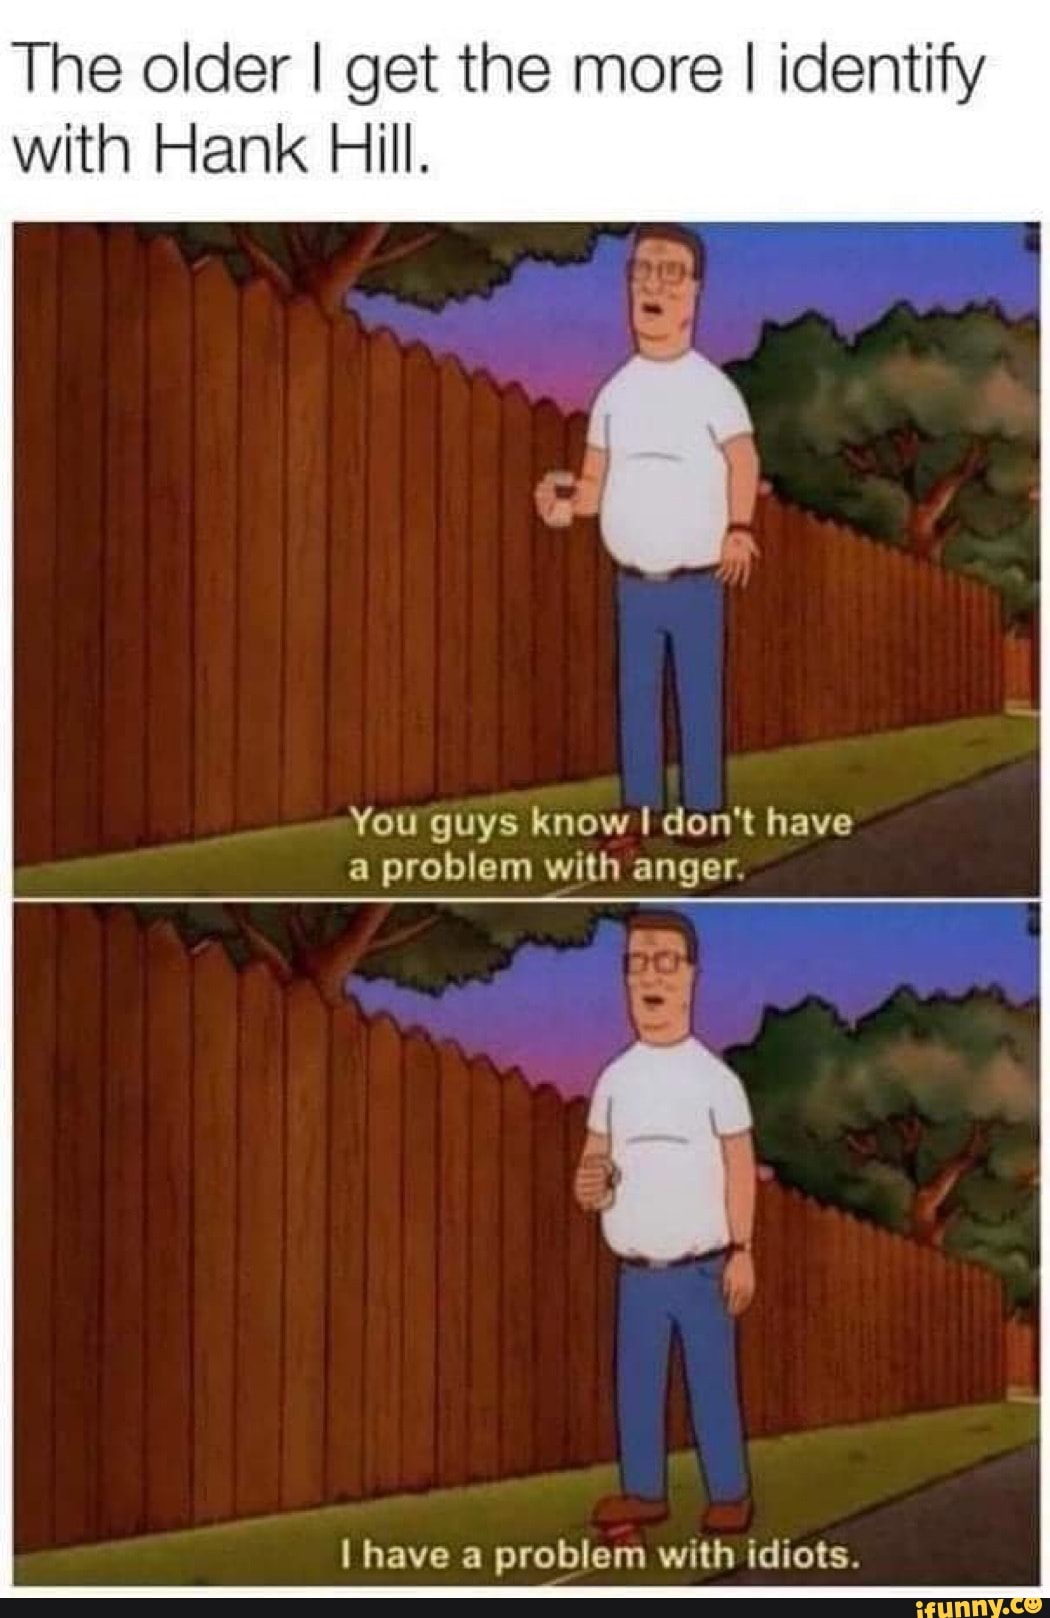 King Of The Hill Do's and Don'ts